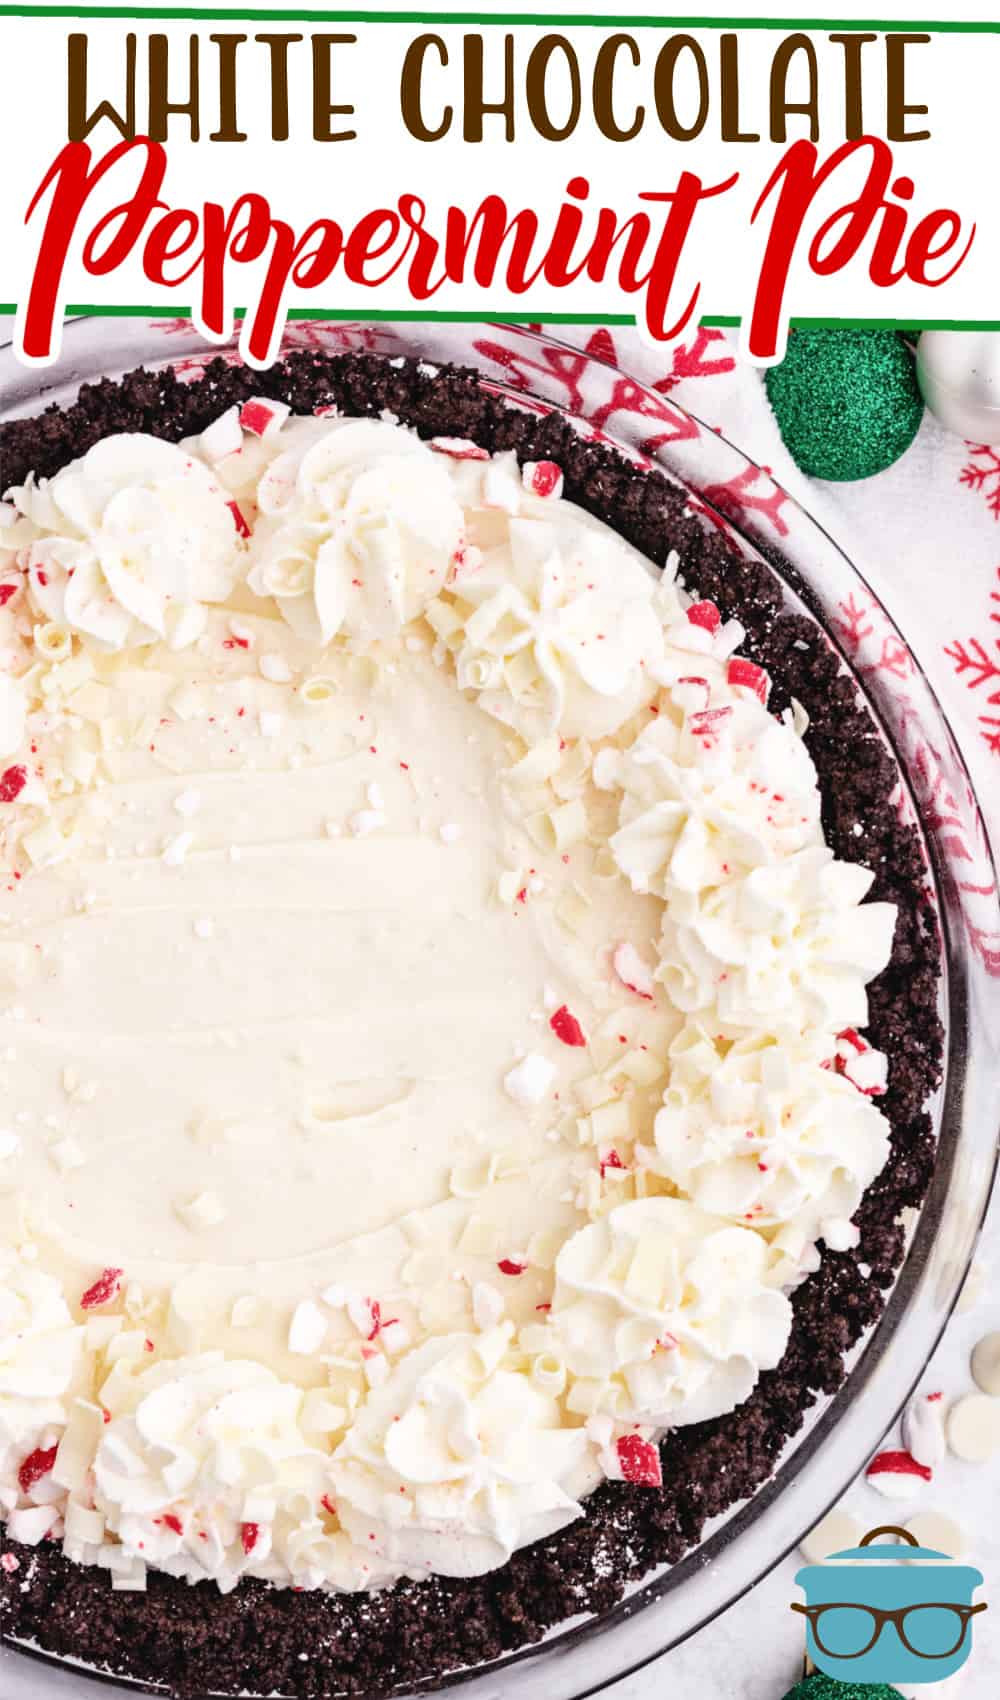 White Chocolate Peppermint Pie with Oreo Cookie Crust recipe from The Country Cook, whole pie showin with Christmas tree ornaments on the side.